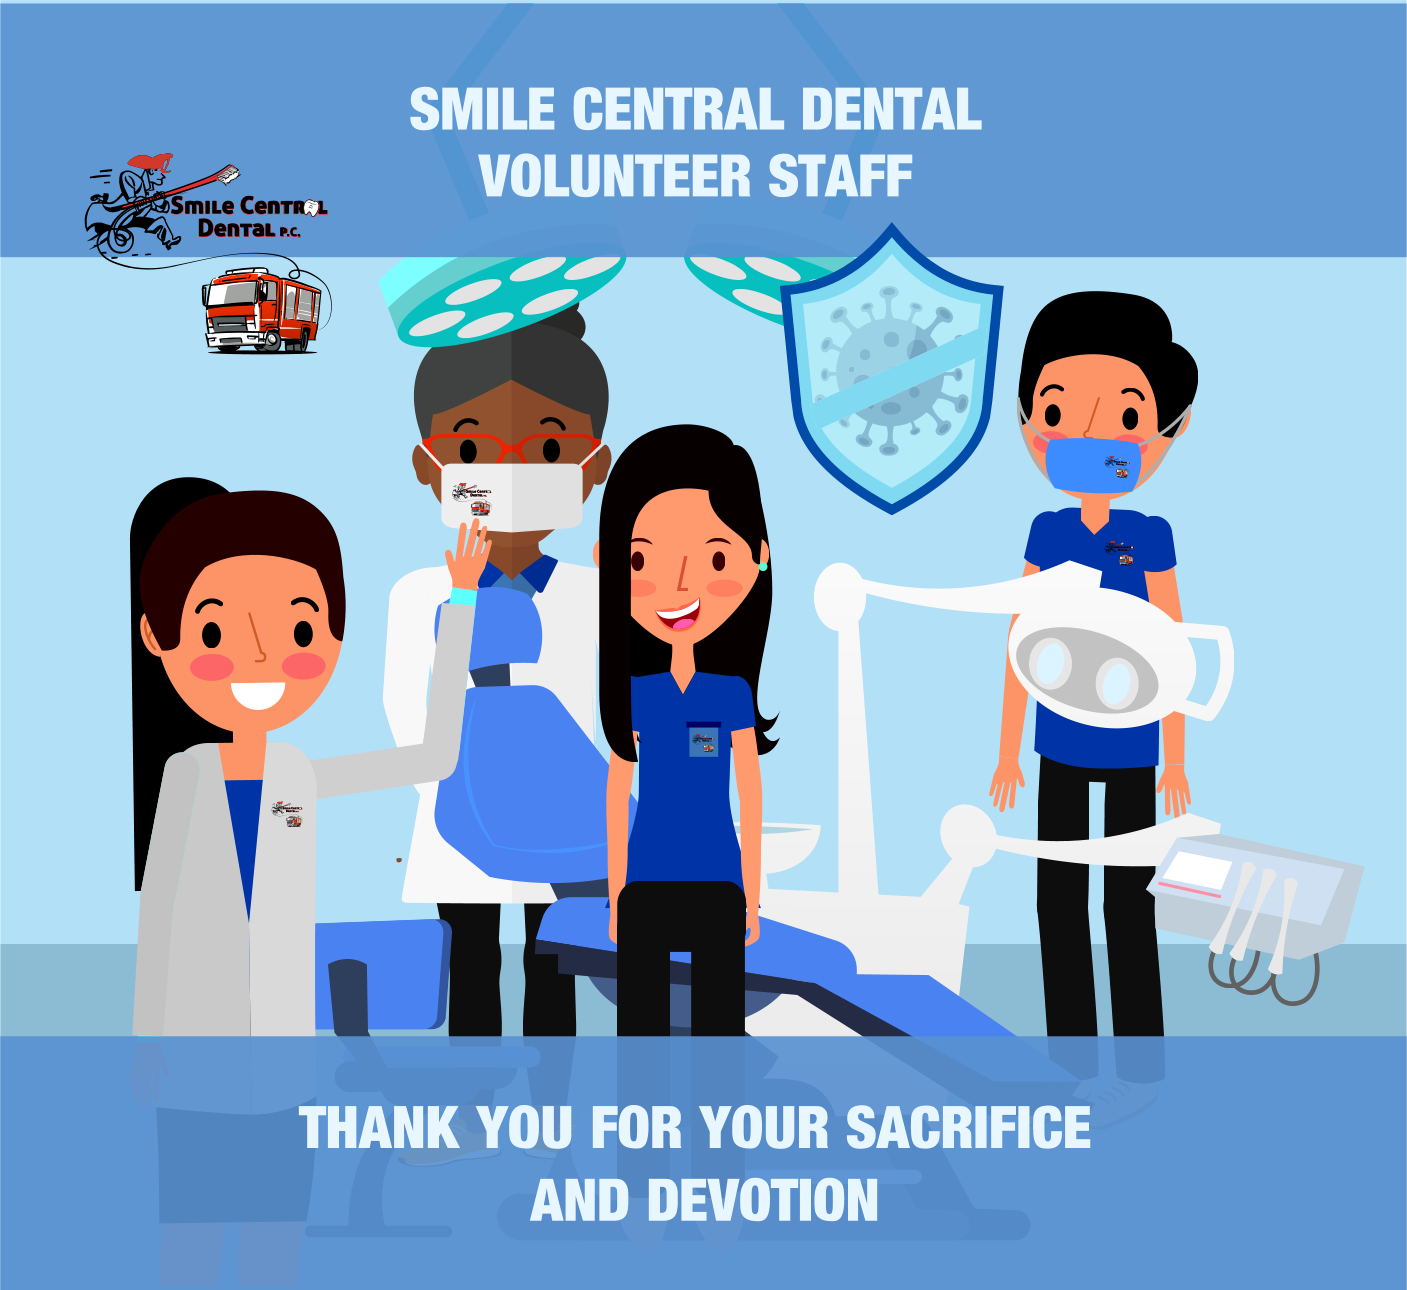 Smile Central Dental Emergency Crisis Workers